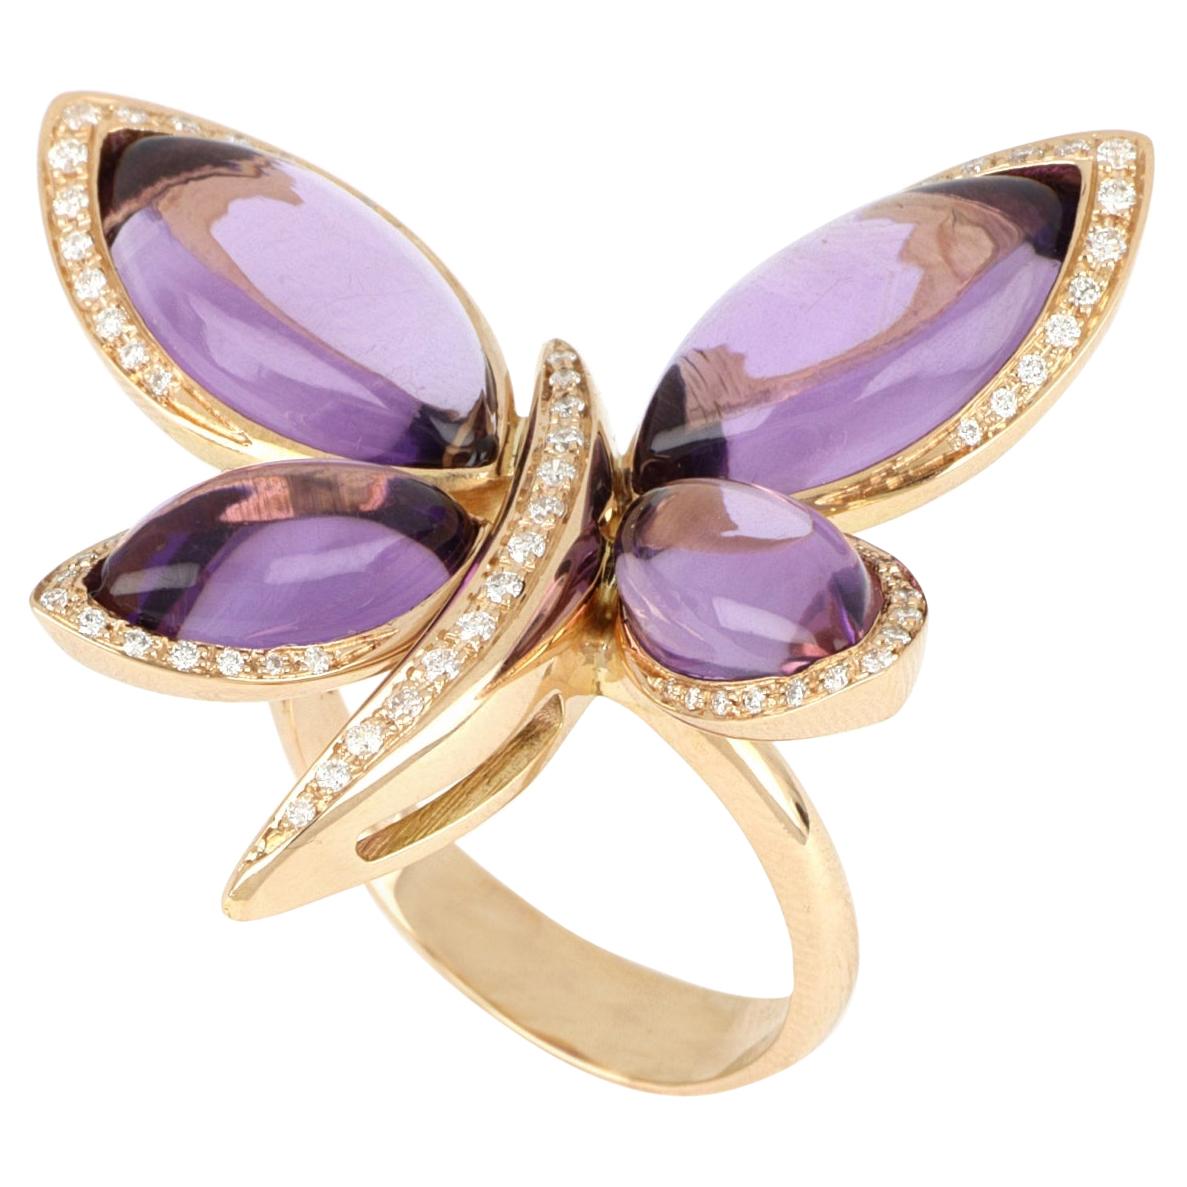 For Sale:  18kt Rose Gold Les Papillons Ring with Purple Amathyst and Diamonds